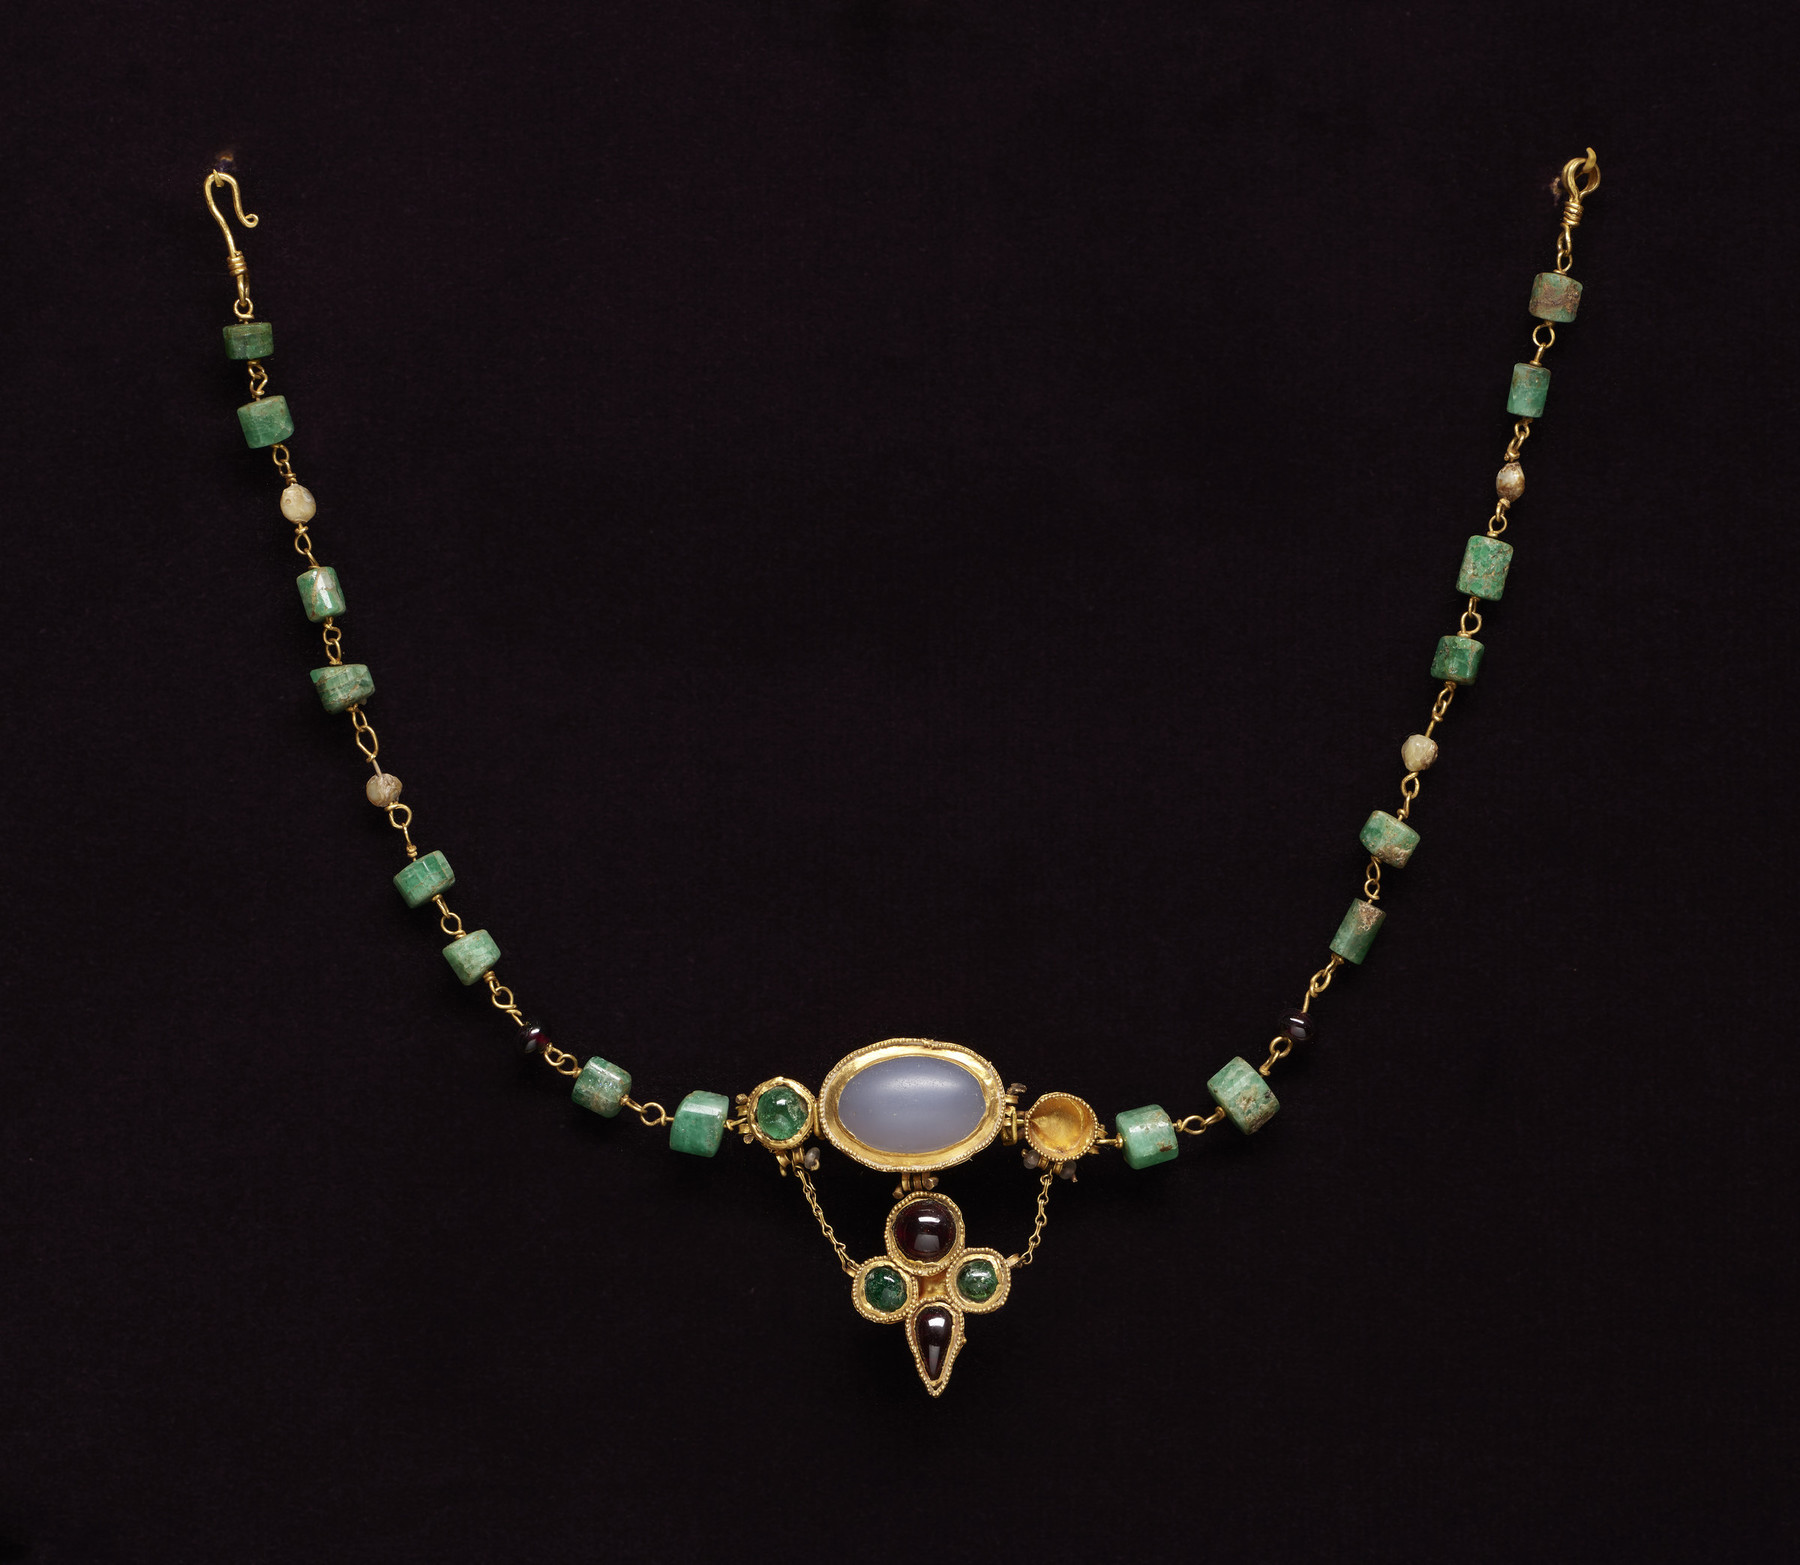 Pendant Necklace | The Walters Art Museum